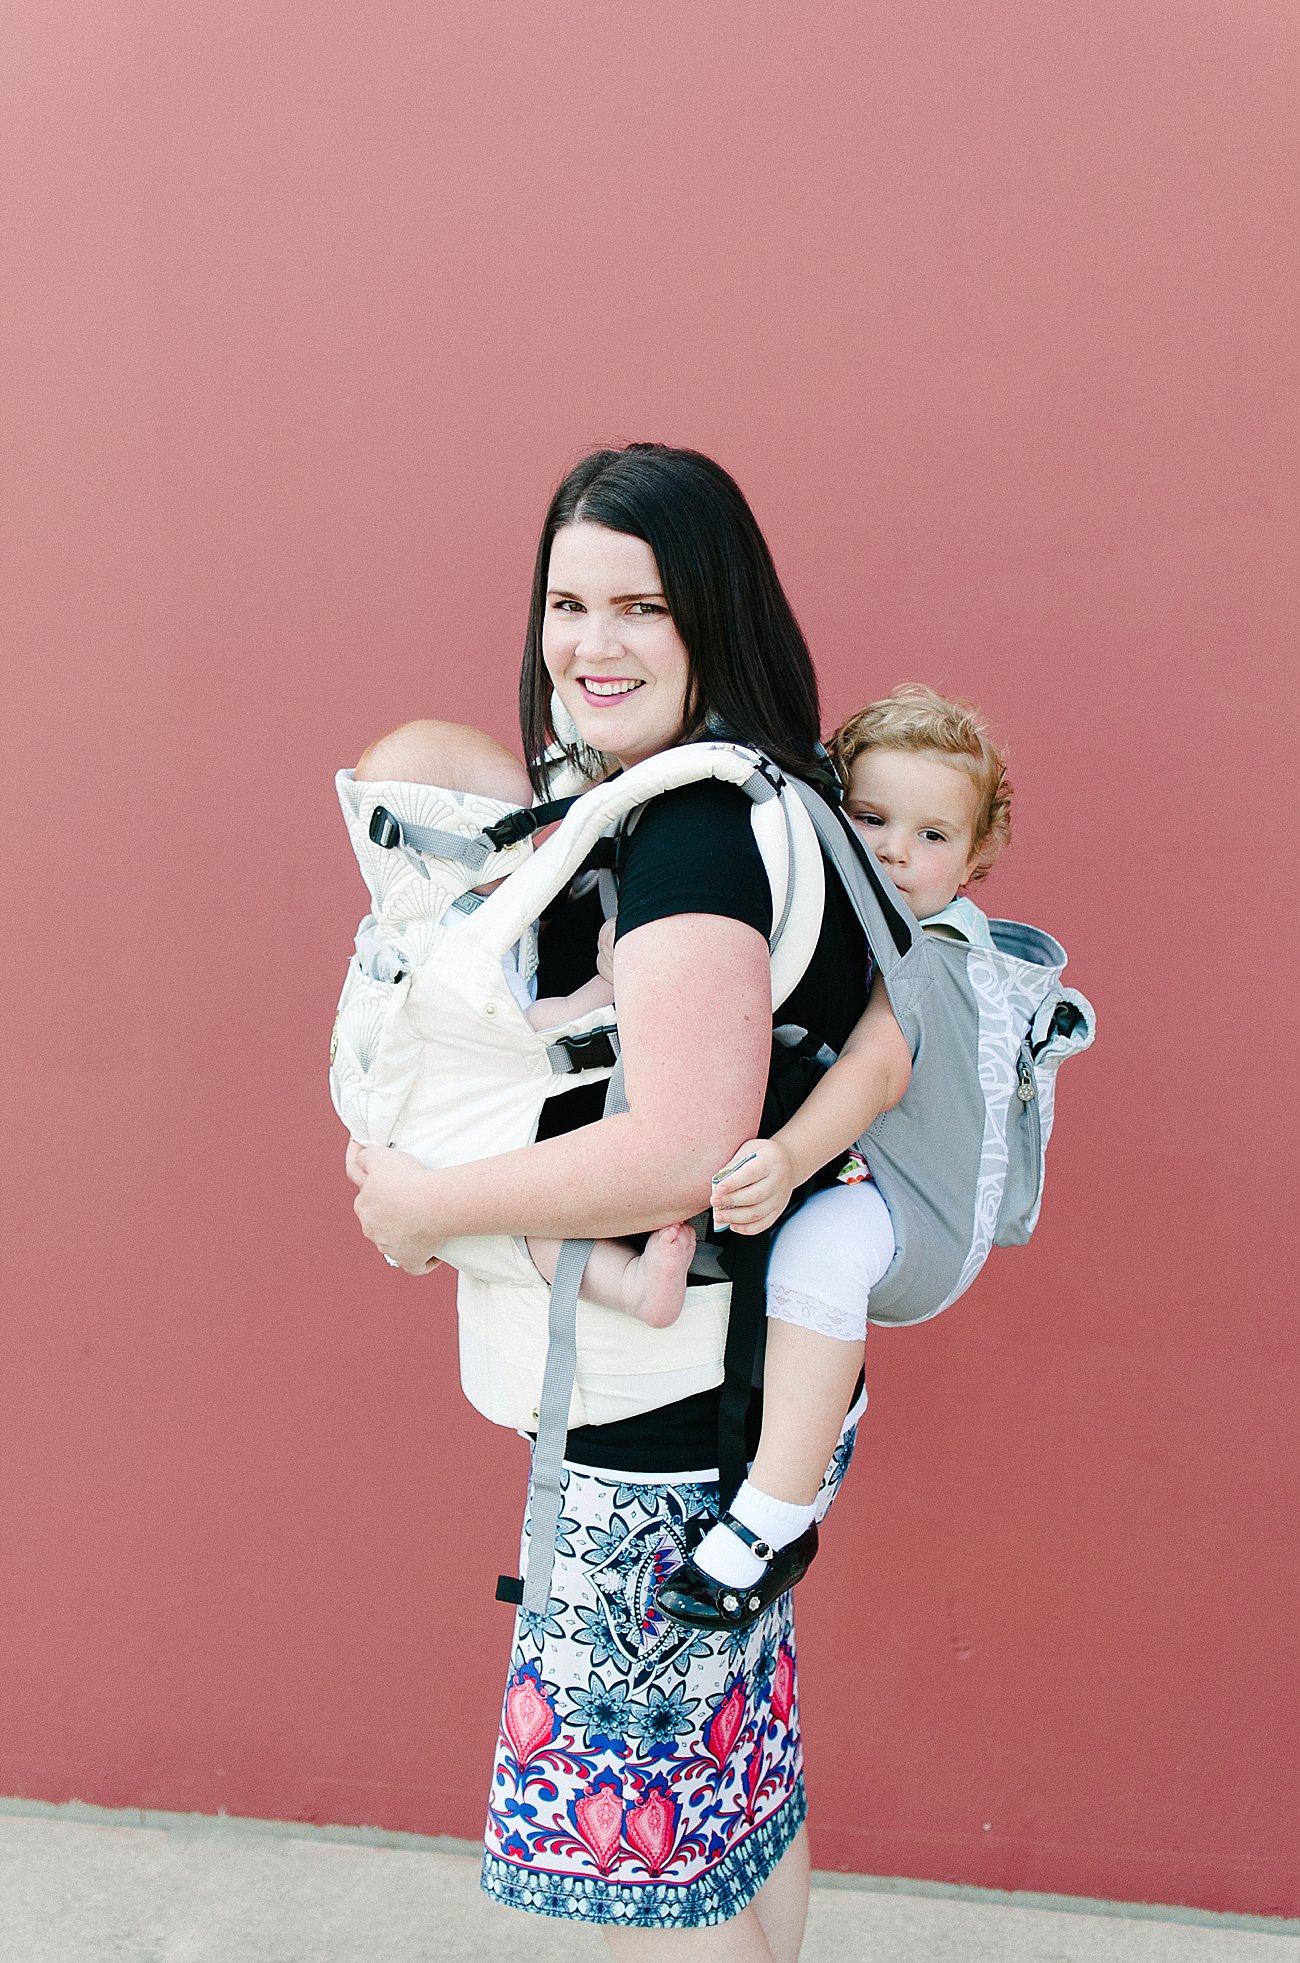 with Lillebaby Complete & CarryOn Baby Carriers #babywearing #tandemwearing #toddlerwearing (4)